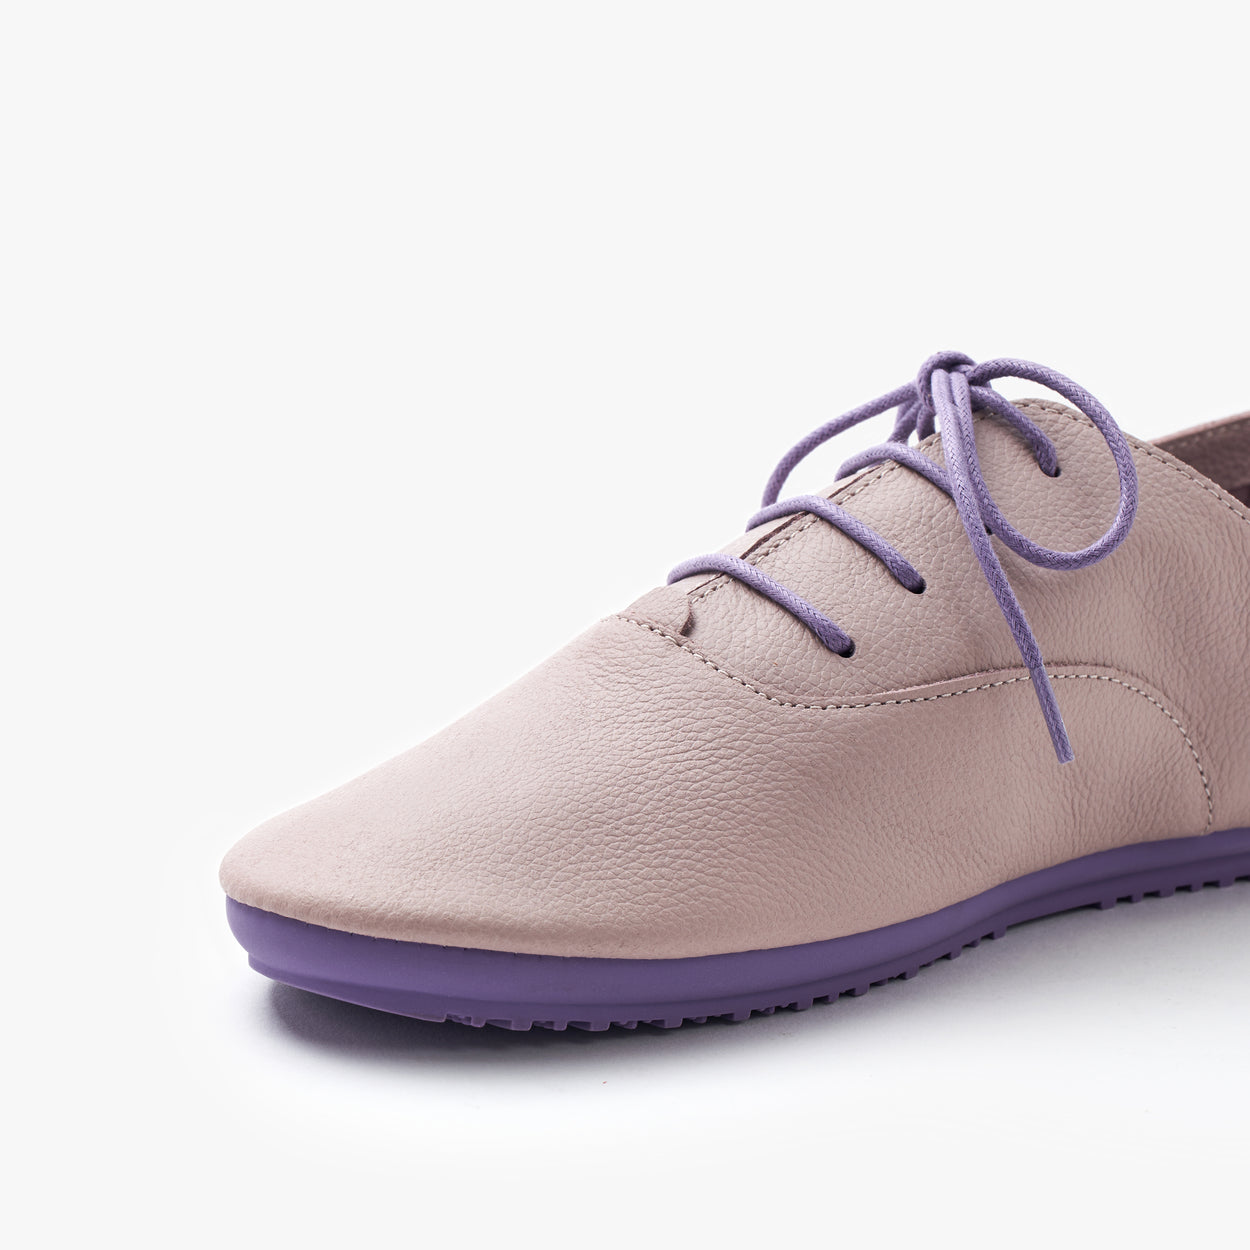 Duo - Lavender – ANOTHERSOLE